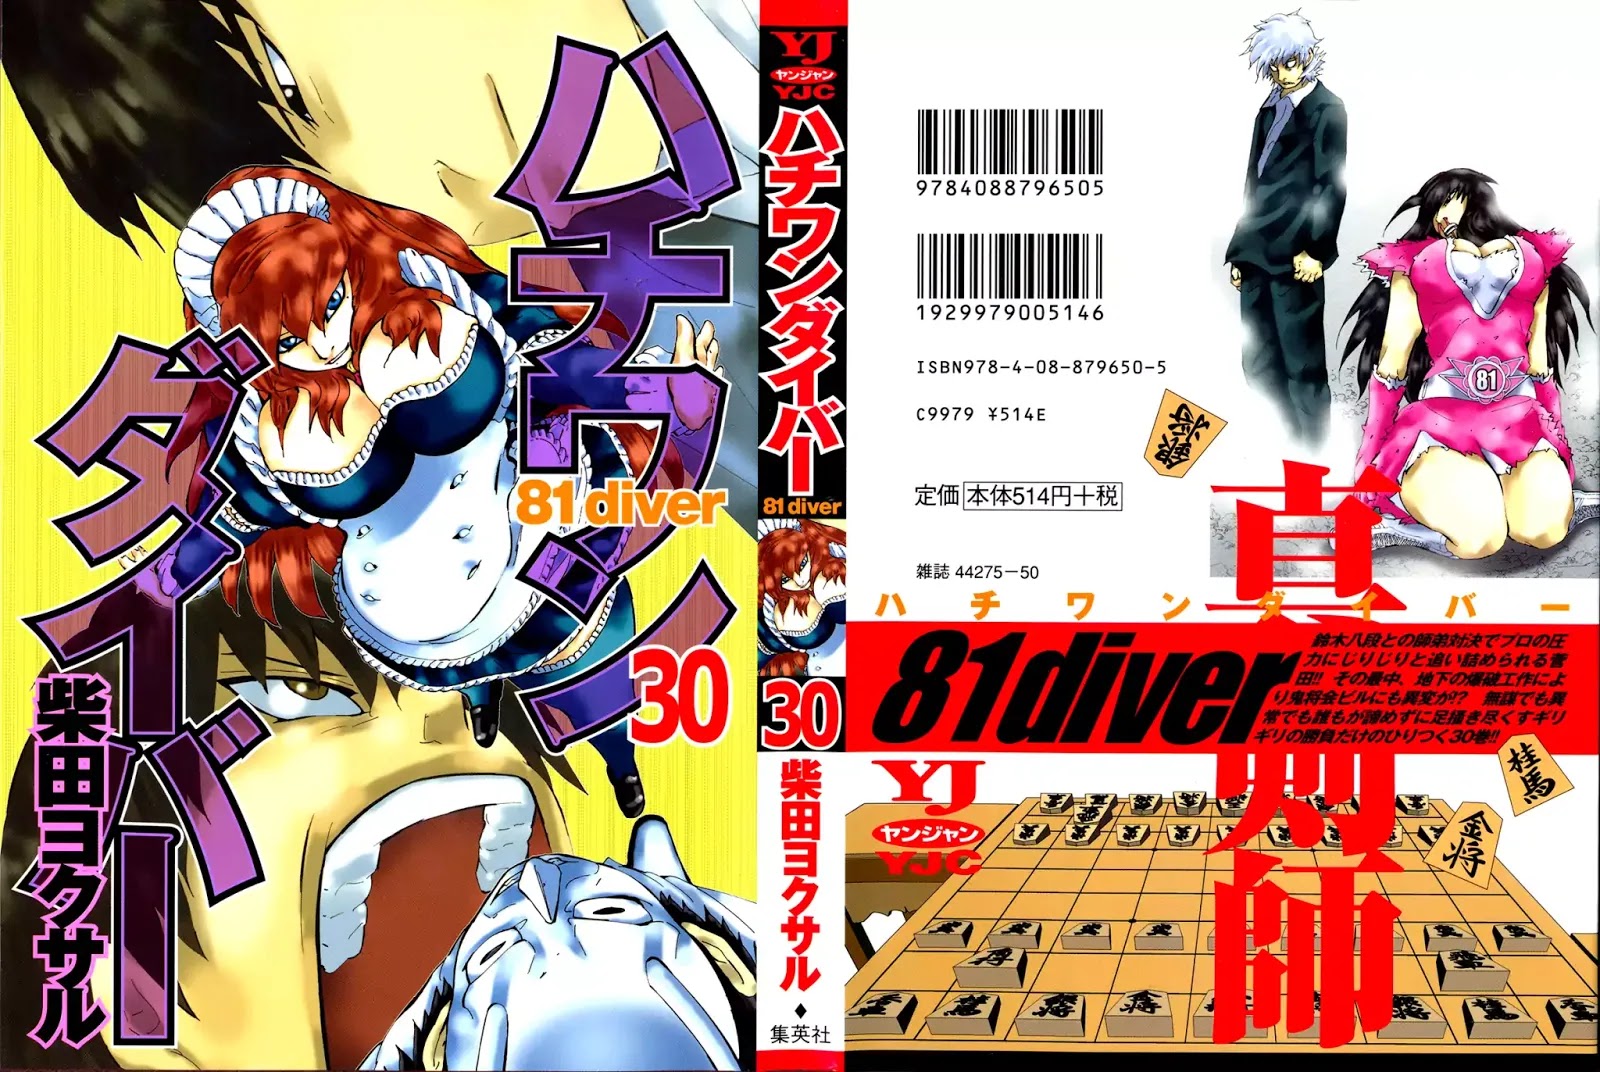 81 Diver Chapter 310 #1